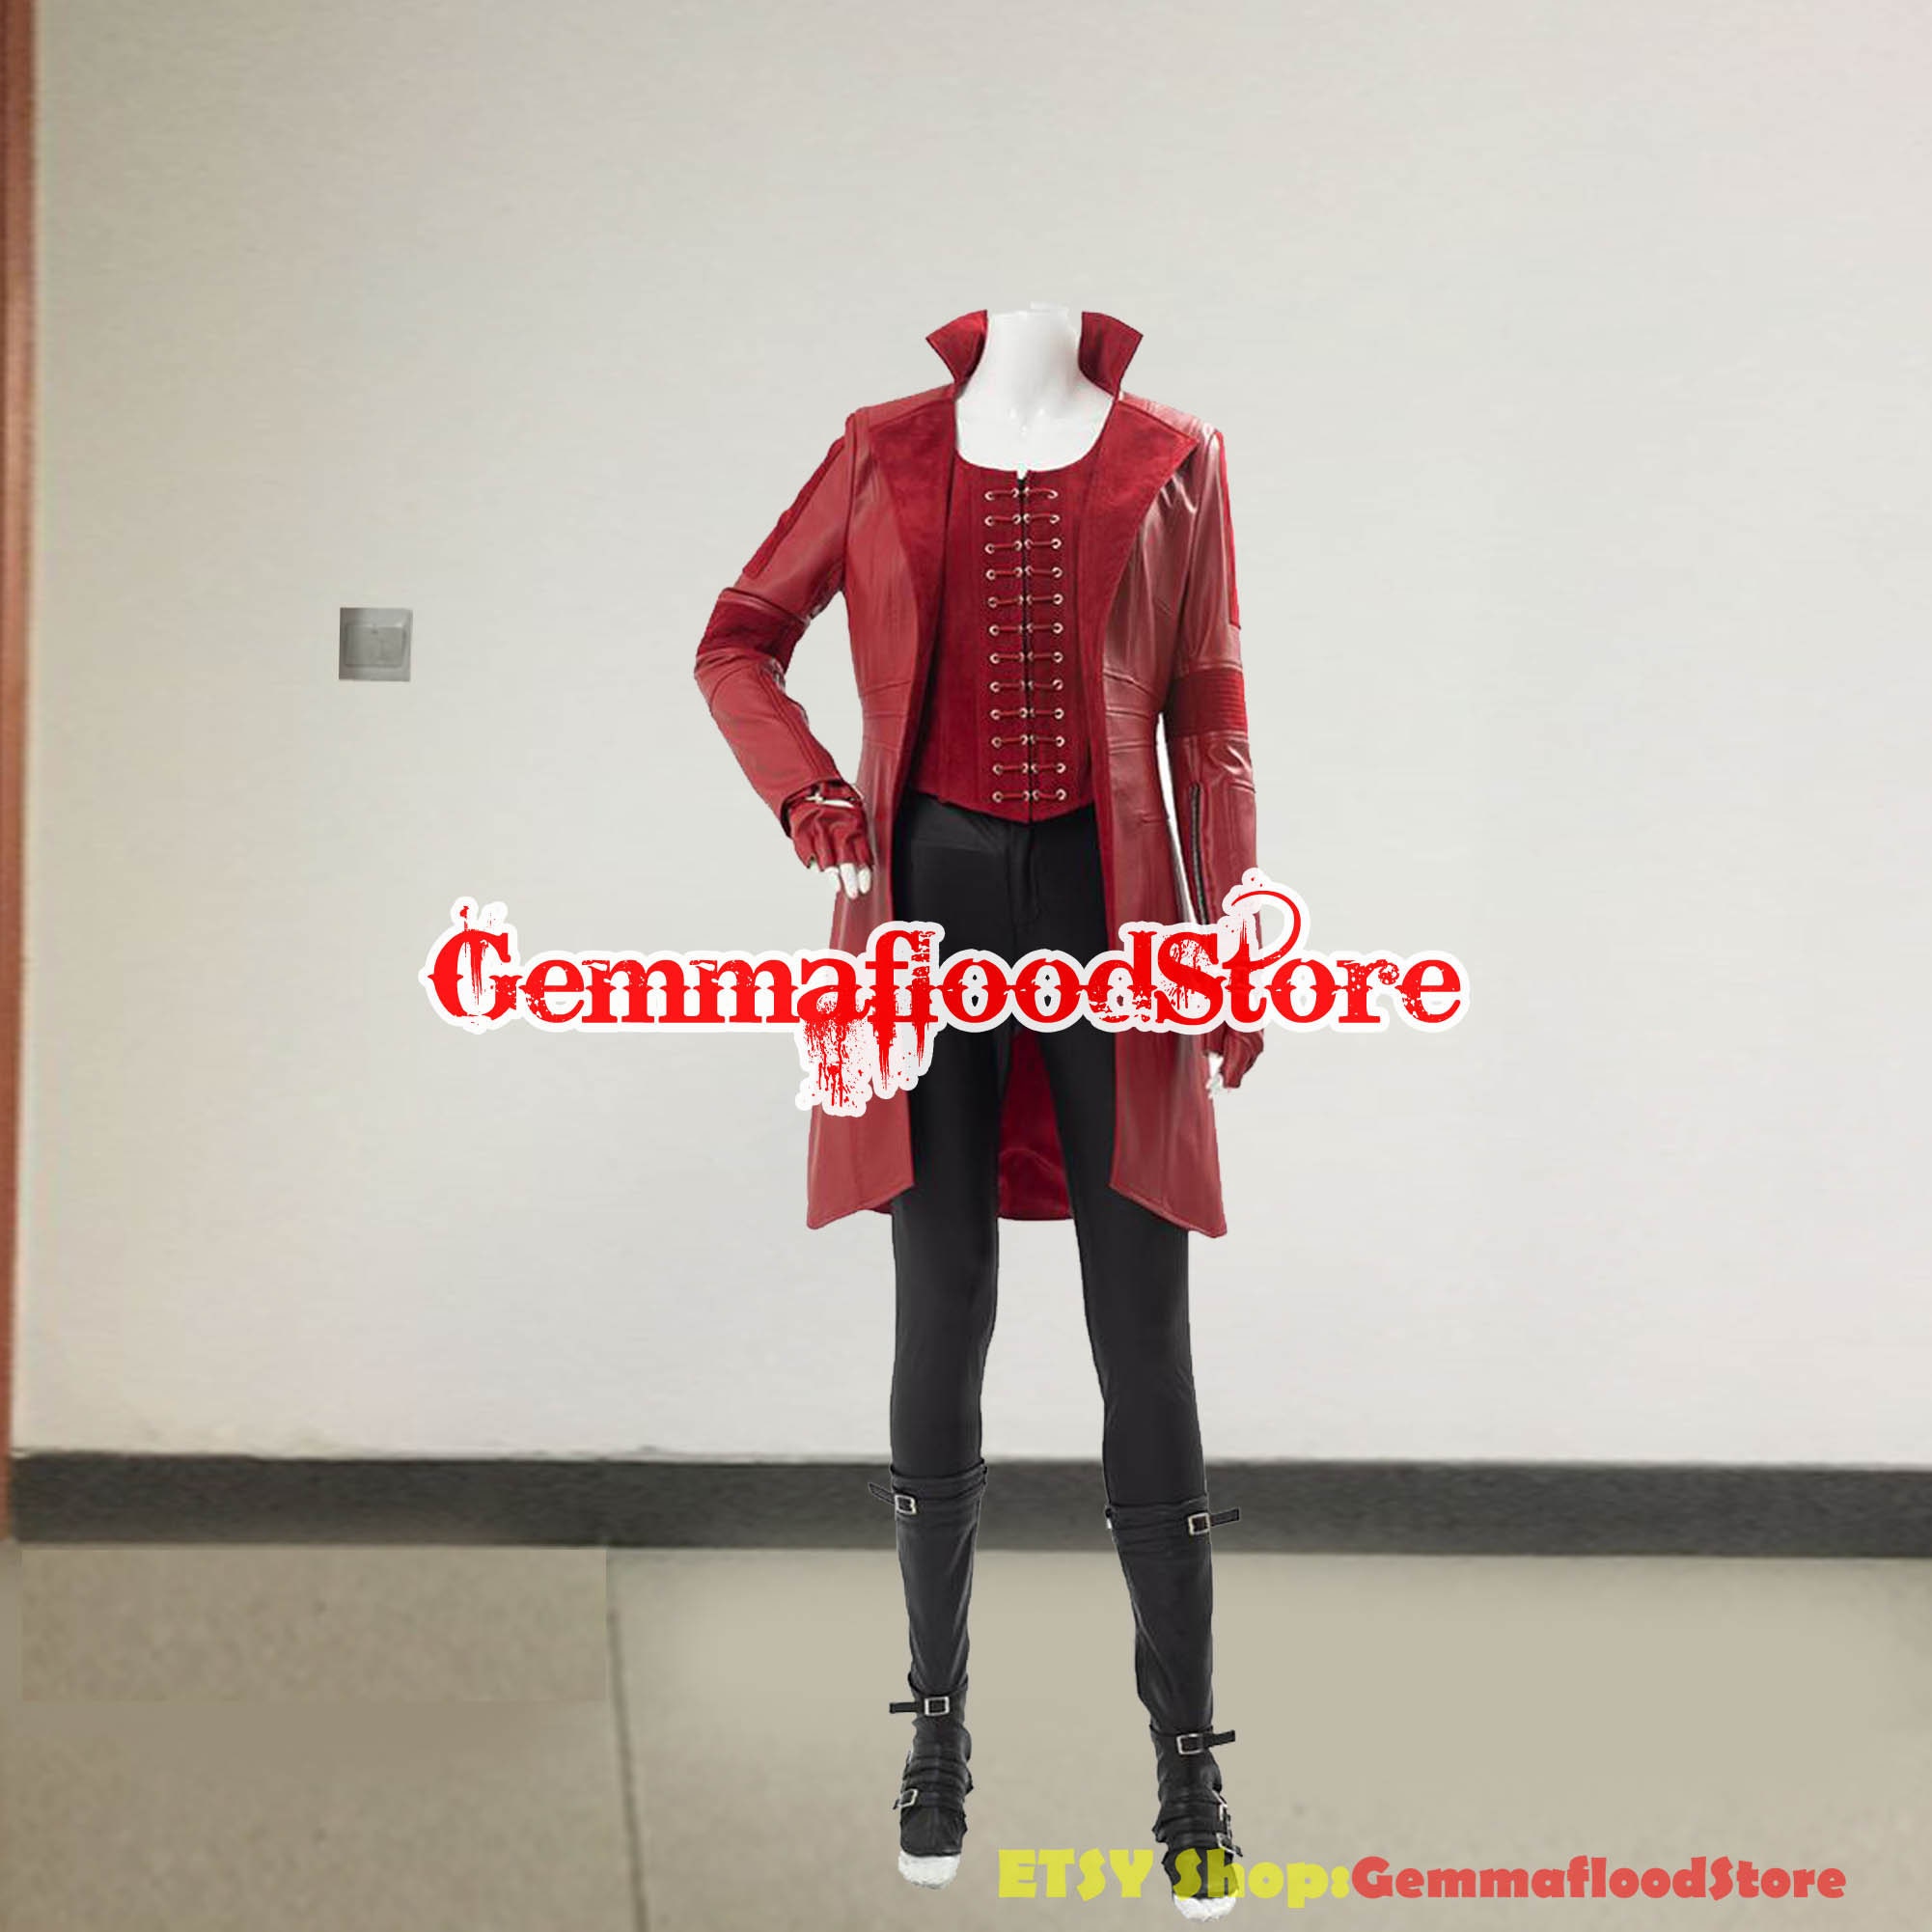 Captain America 3 Civil War Scarlet Witch Wanda Cosplay Costume Halloween Outfit